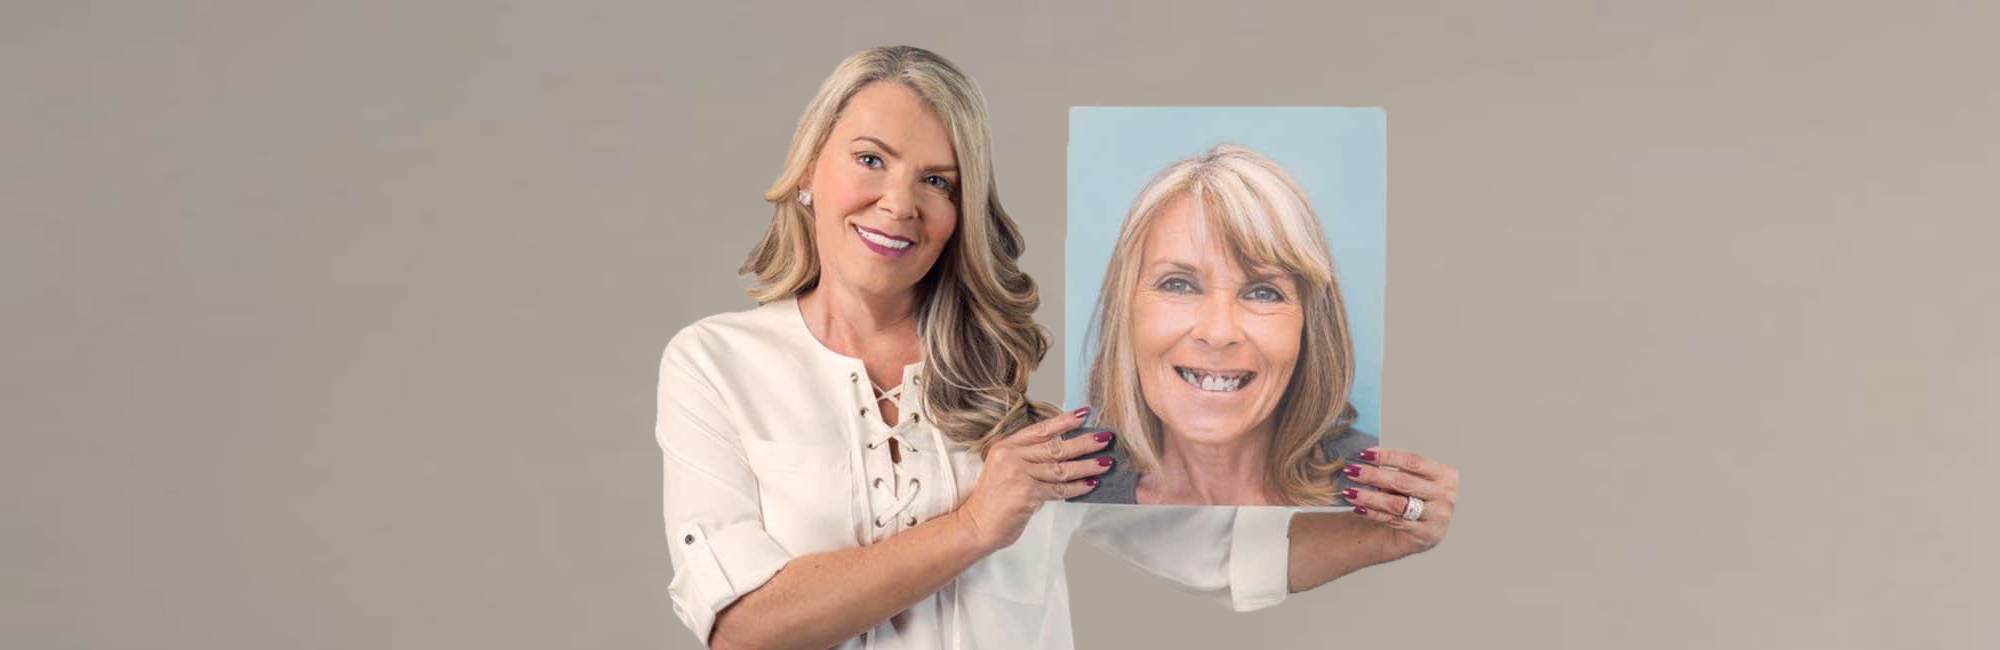 Advanced periodontal disease patient shows off her before photo while flashing her new healthy smile